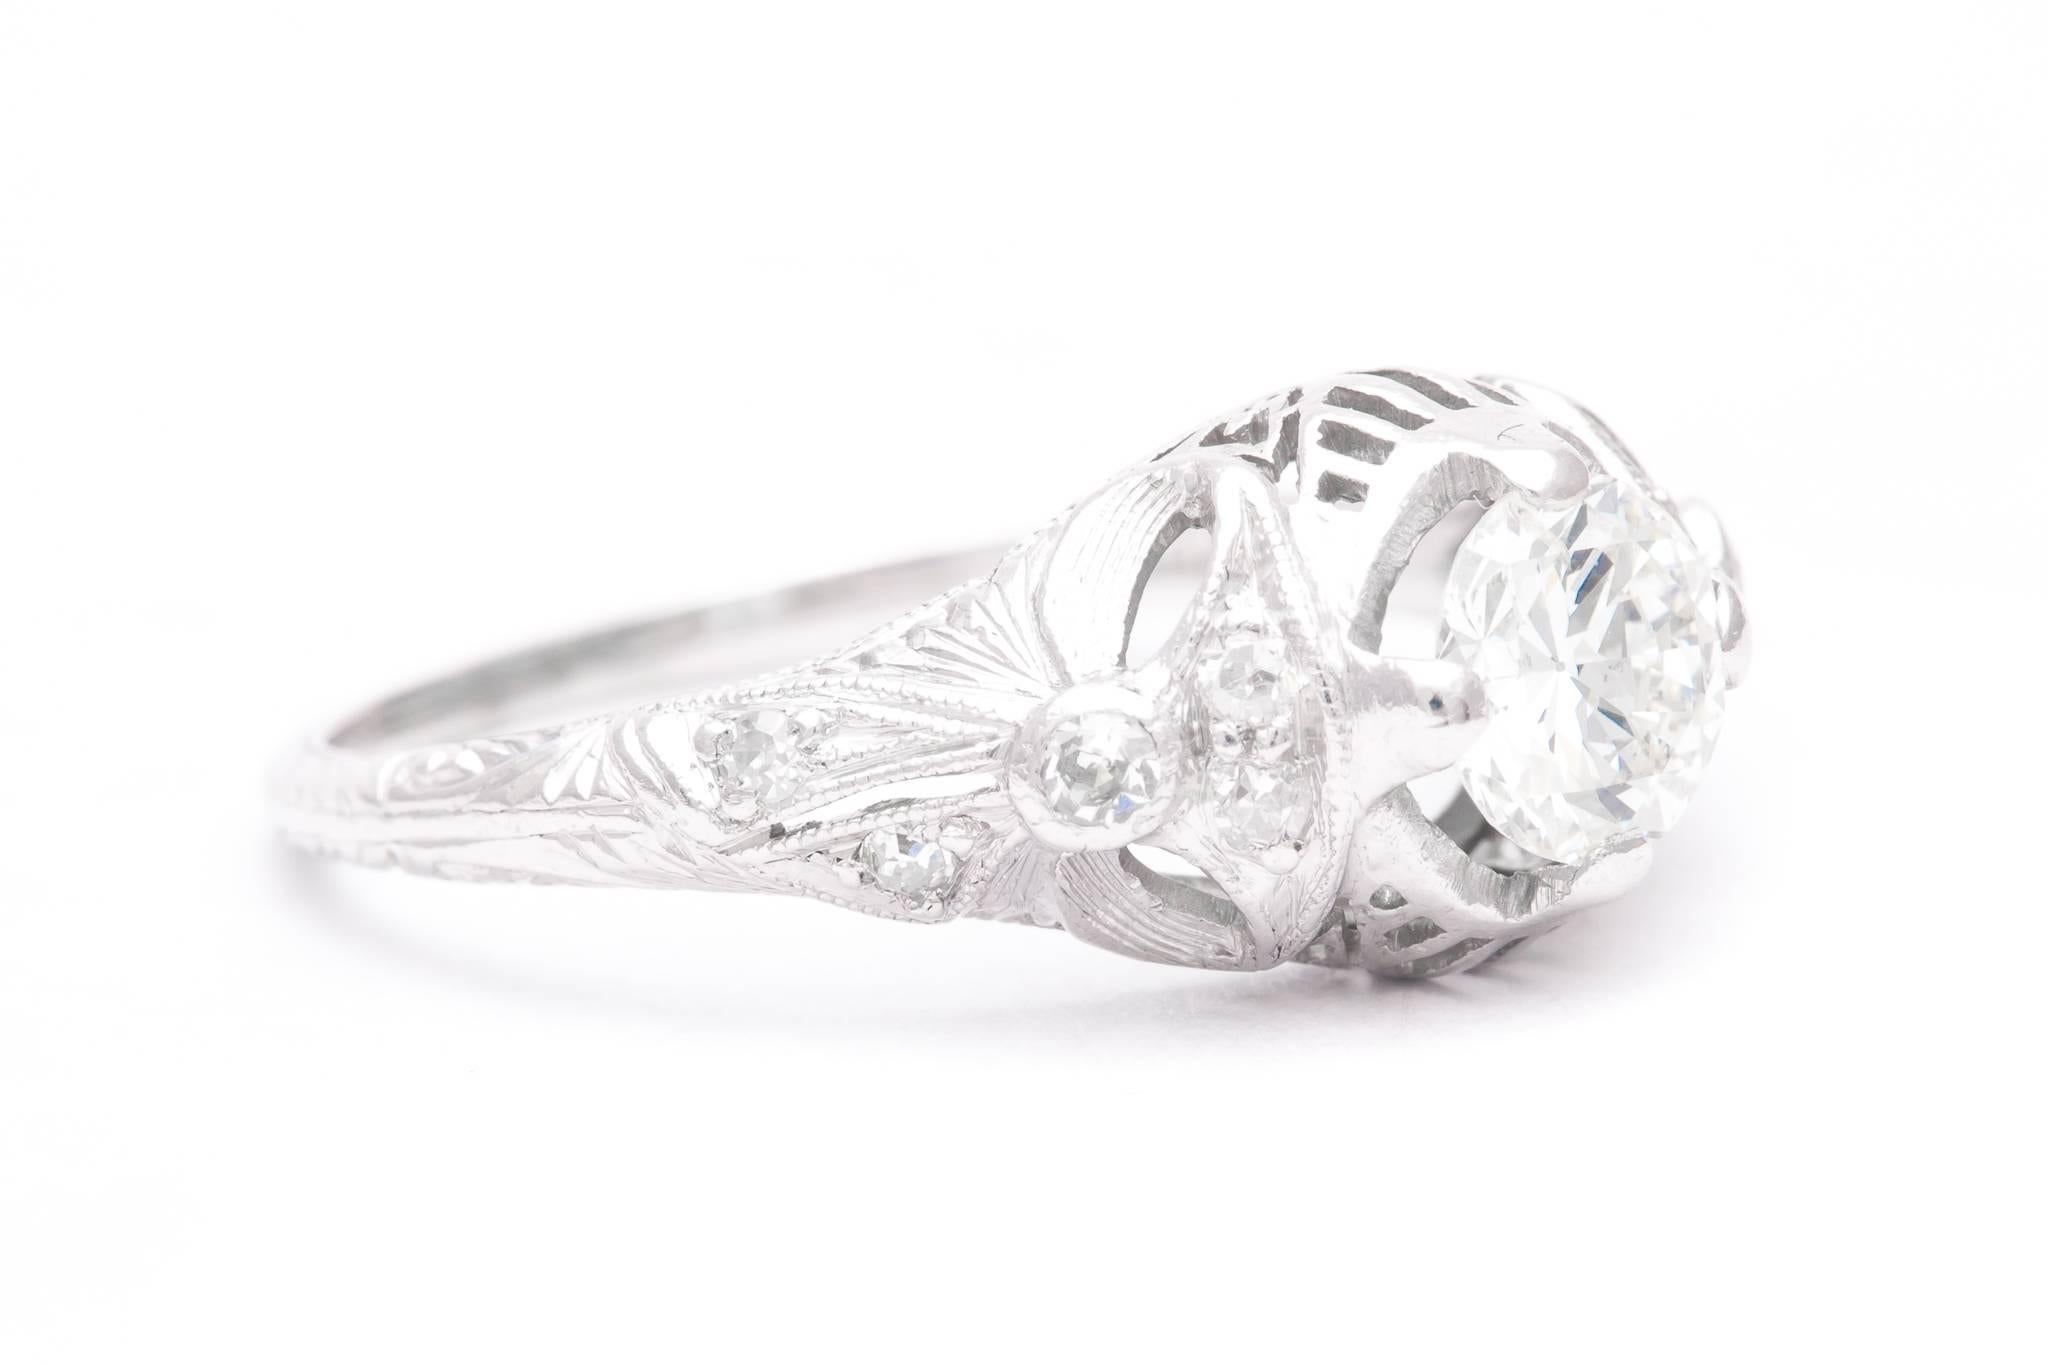 A fantastic original art deco period diamond engagement ring in luxurious platinum.  Centered by a 0.62 carat antique European cut diamond, this ring features a unique bow like design along with pave set accenting diamonds.

All grading as beautiful